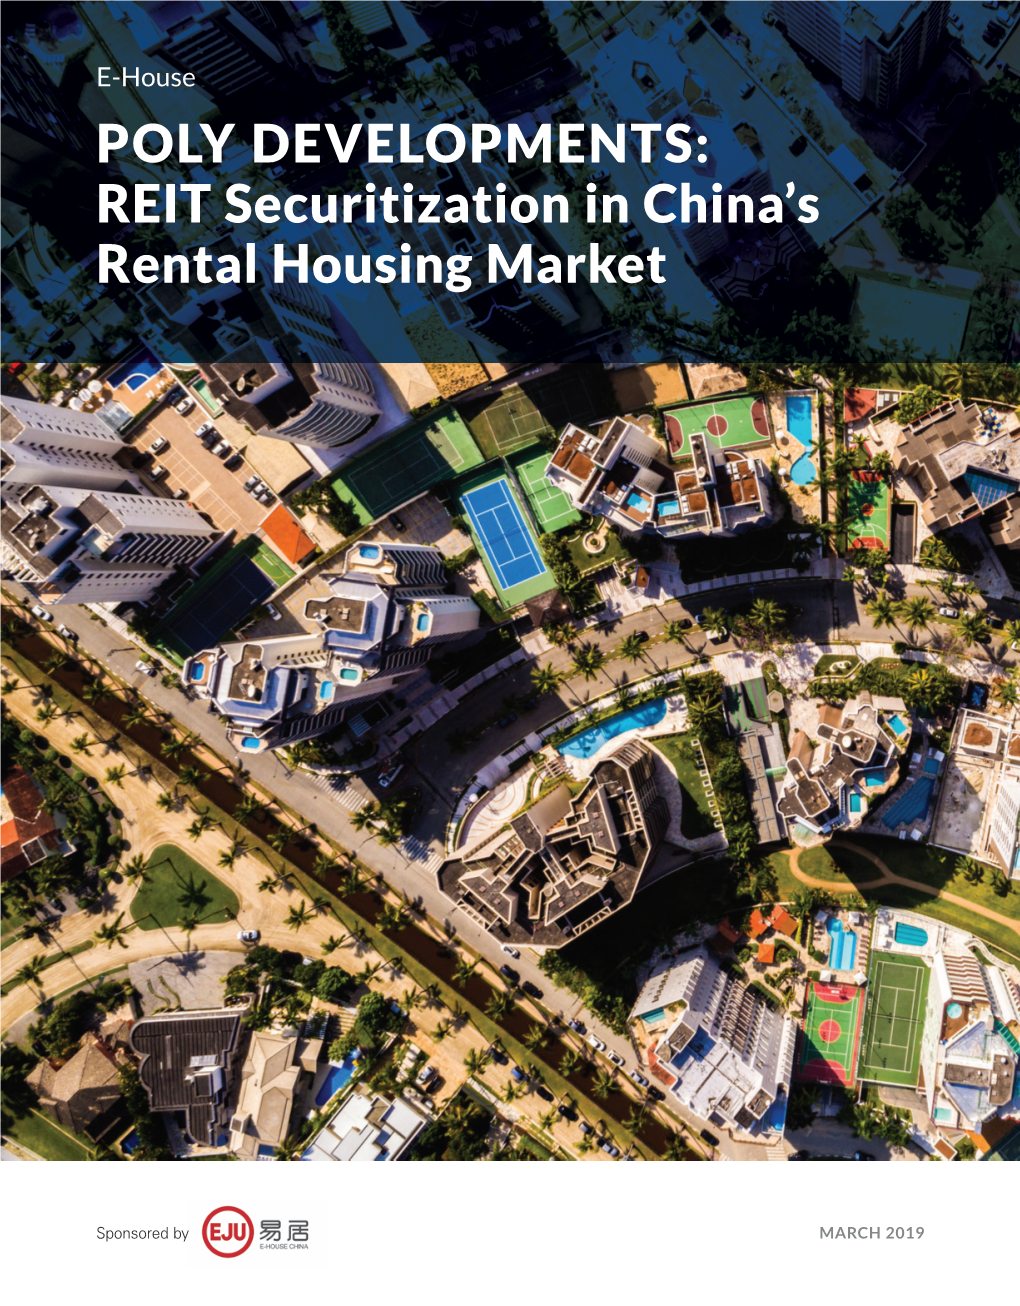 POLY DEVELOPMENTS: REIT Securitization in China's Rental